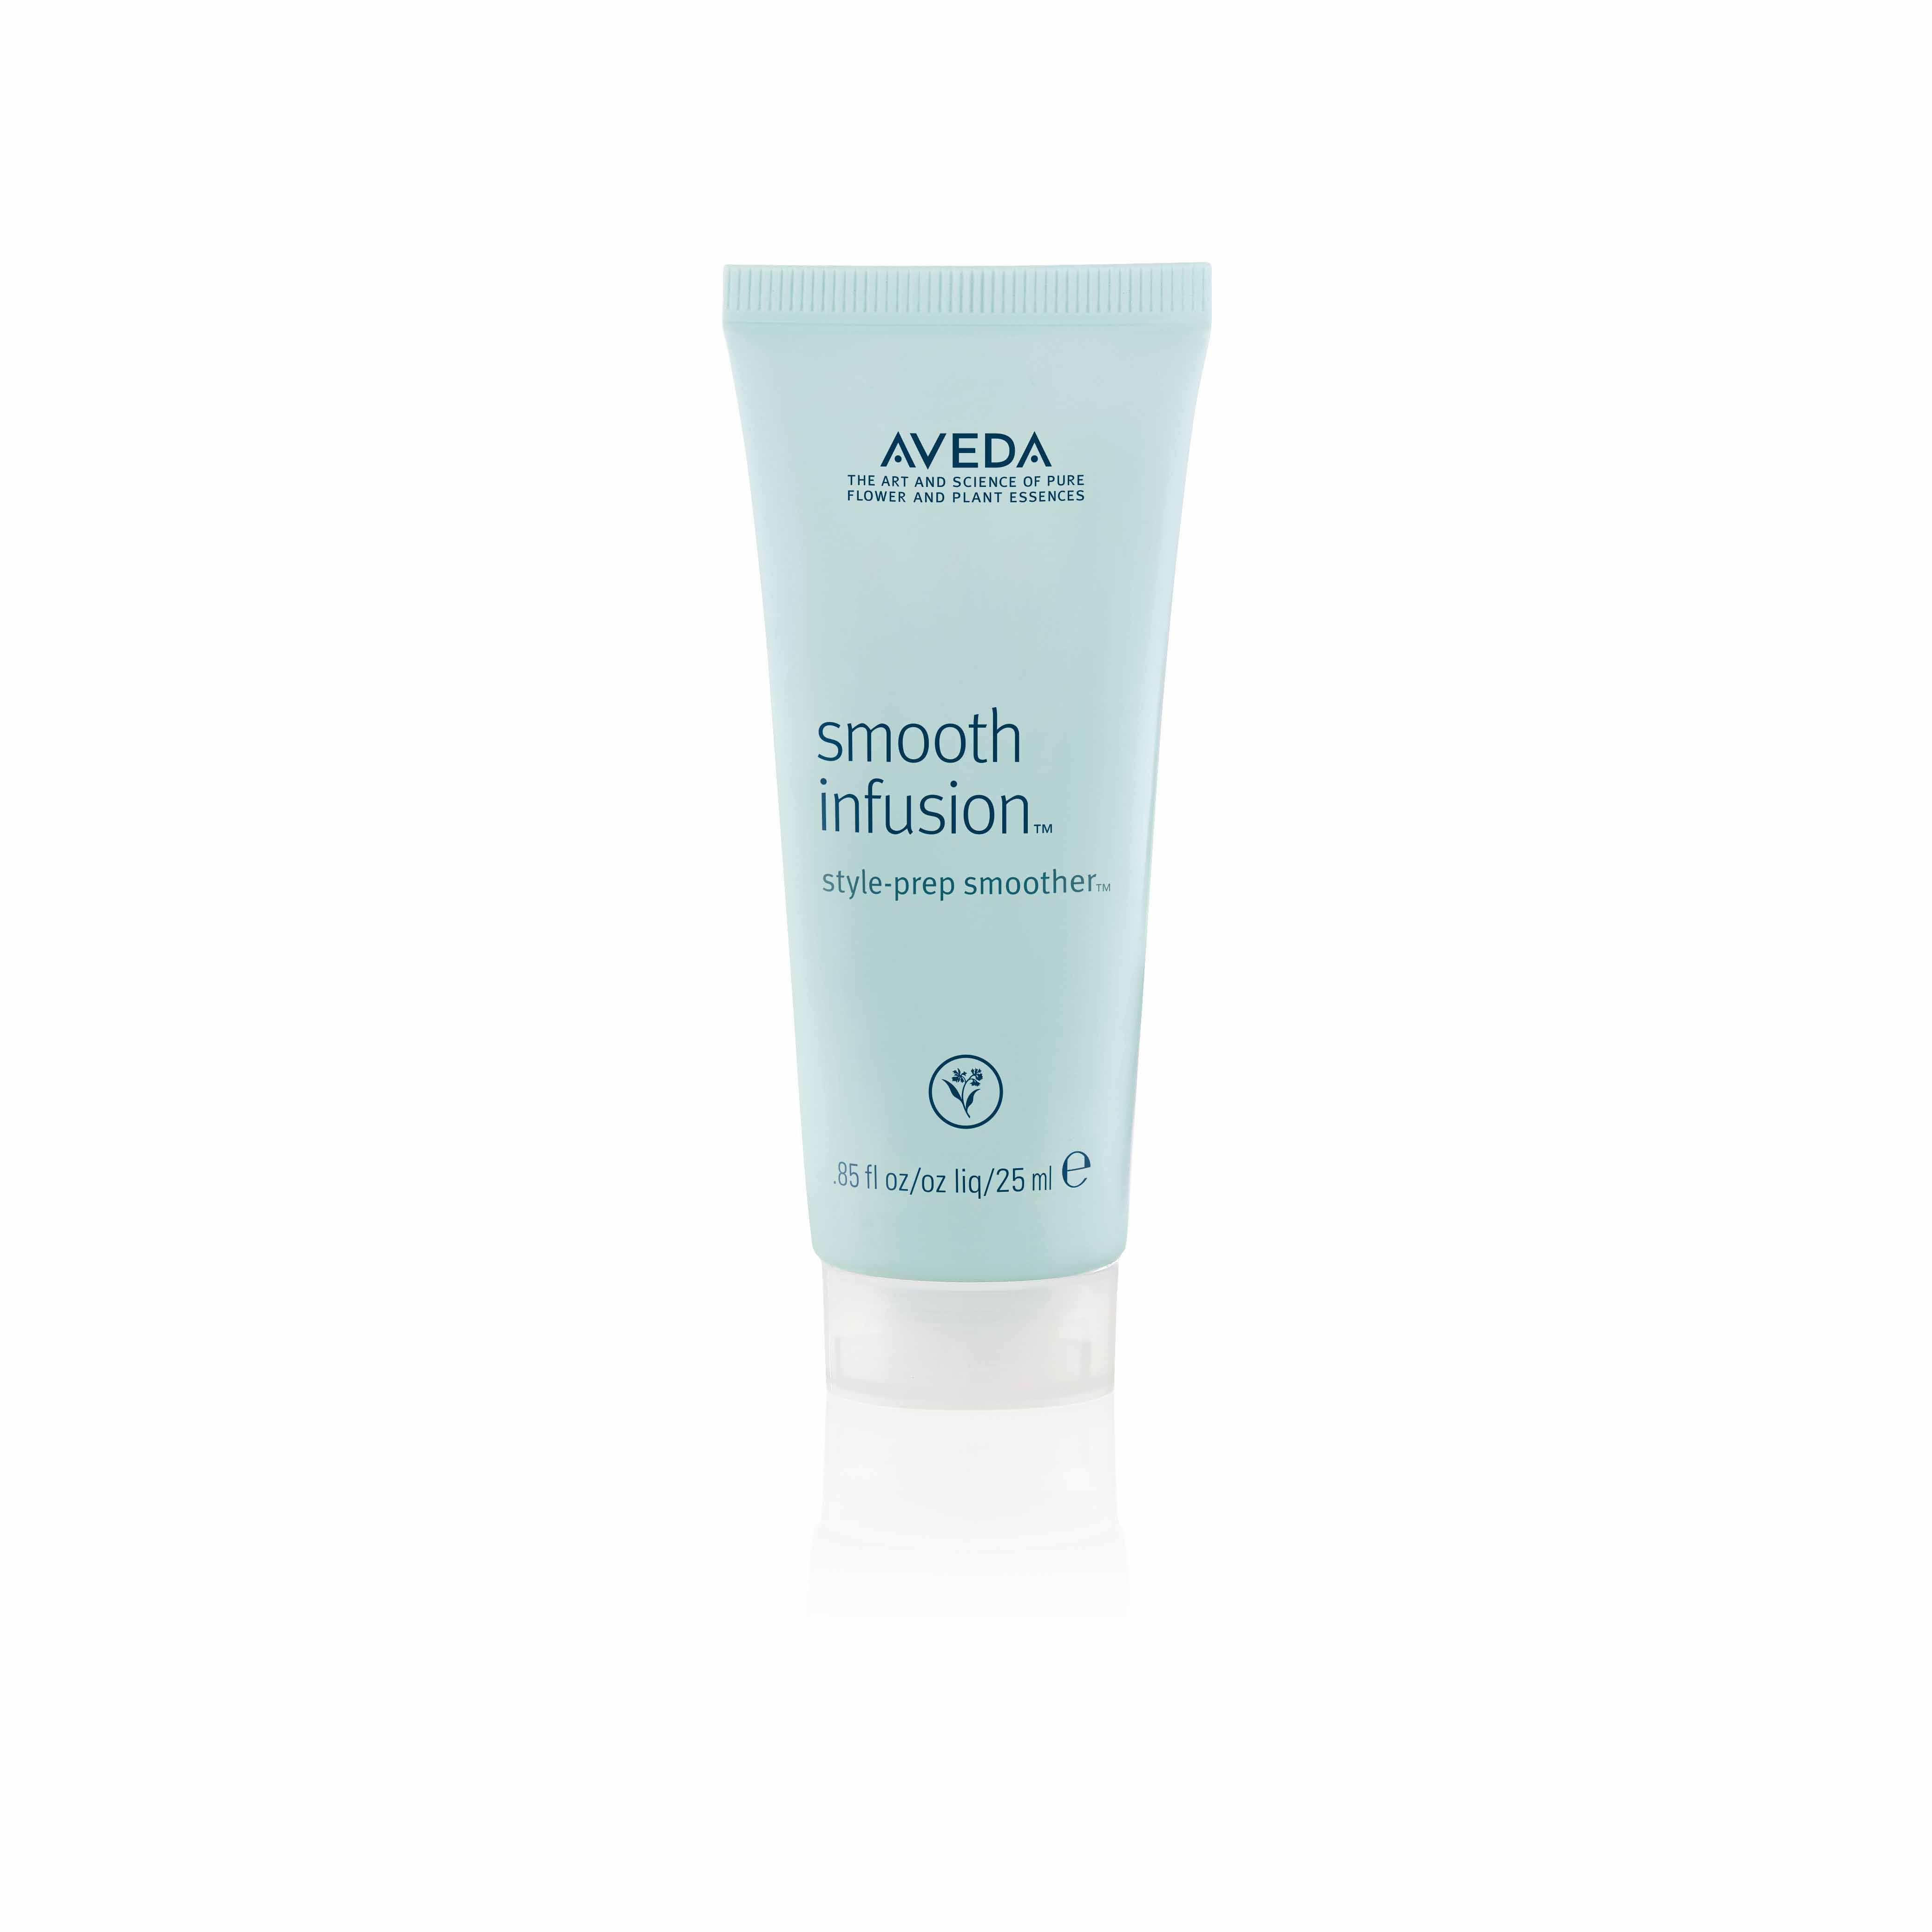 https://av-dashop.nl/wp-content/uploads/2020/11/Aveda-smooth-infusion-style-prep-smoother.jpg